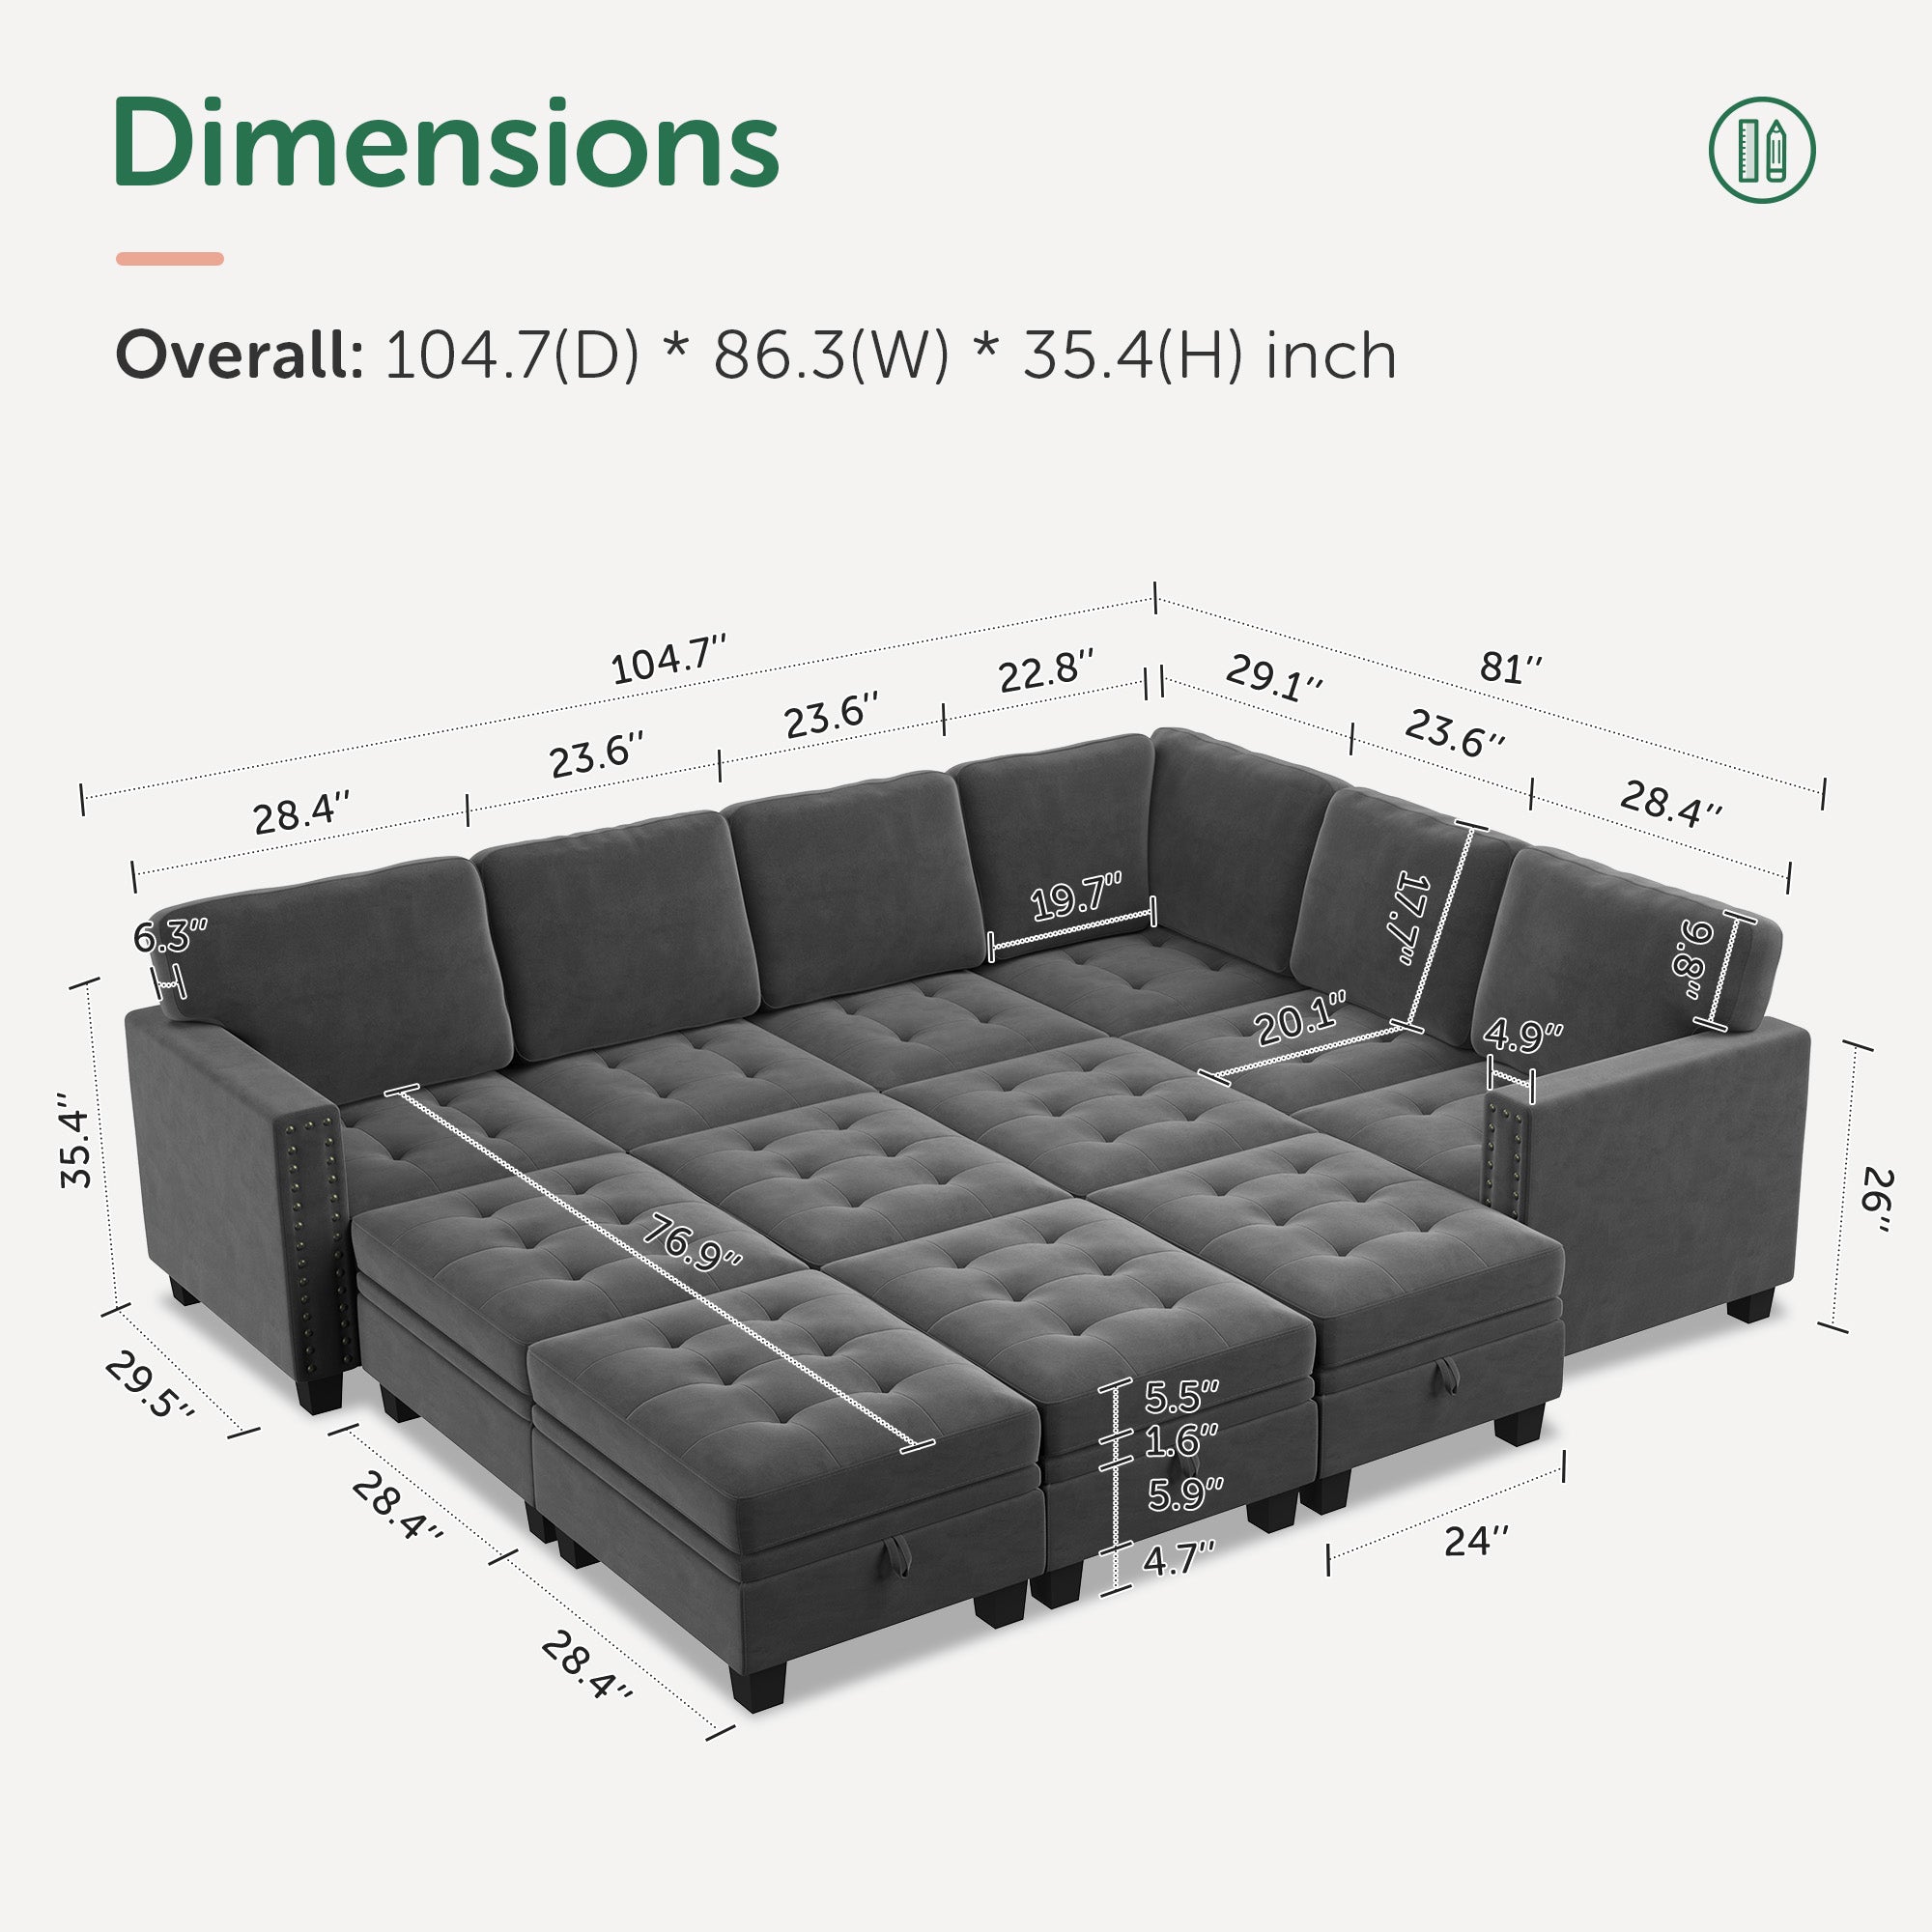 Modular Sleeper Sectional With Storage Space With Measurements